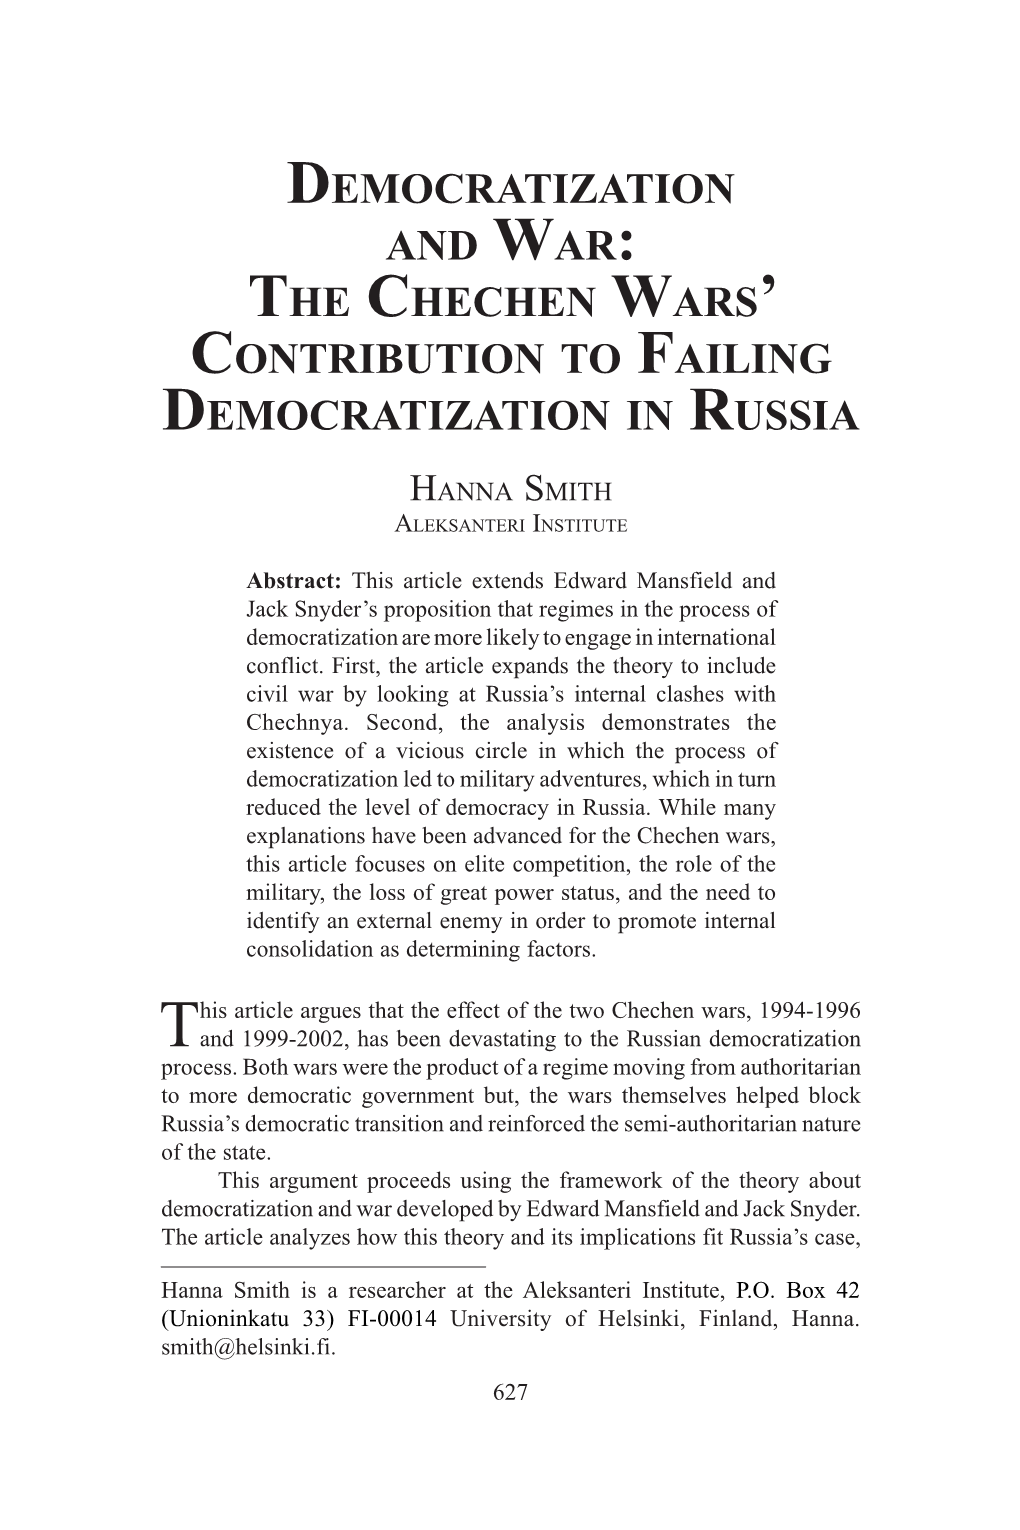 The Chechen Wars' Contribution to Failing